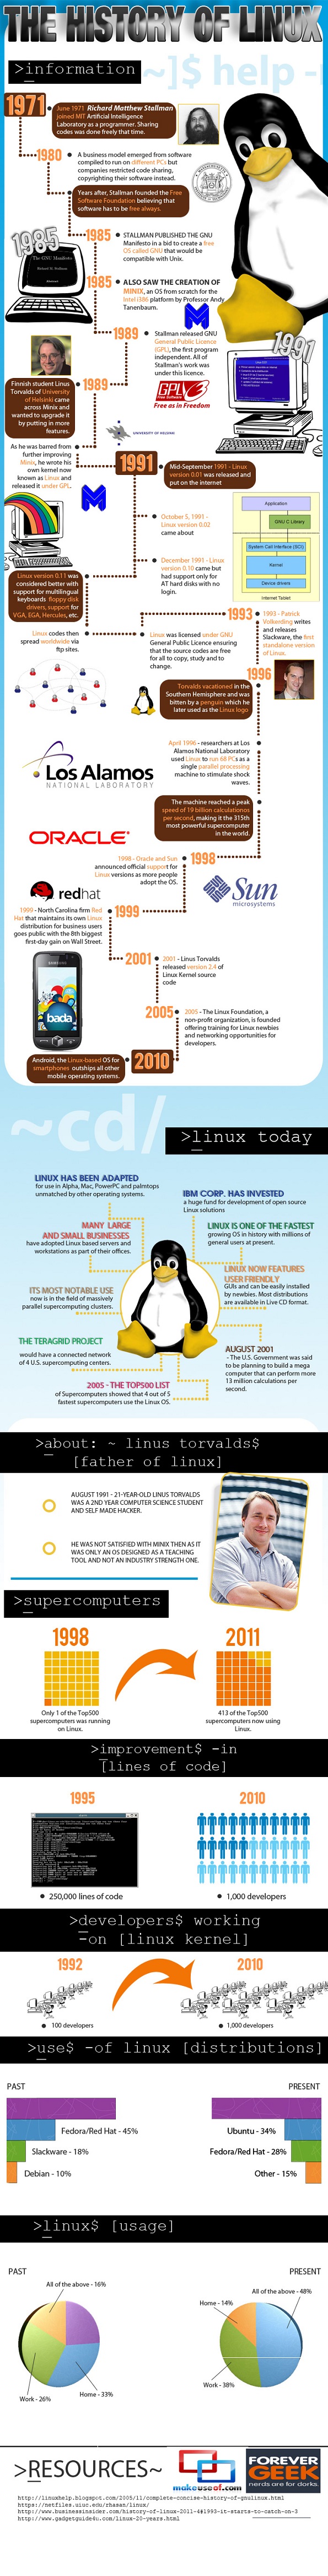 the_history_of_linux